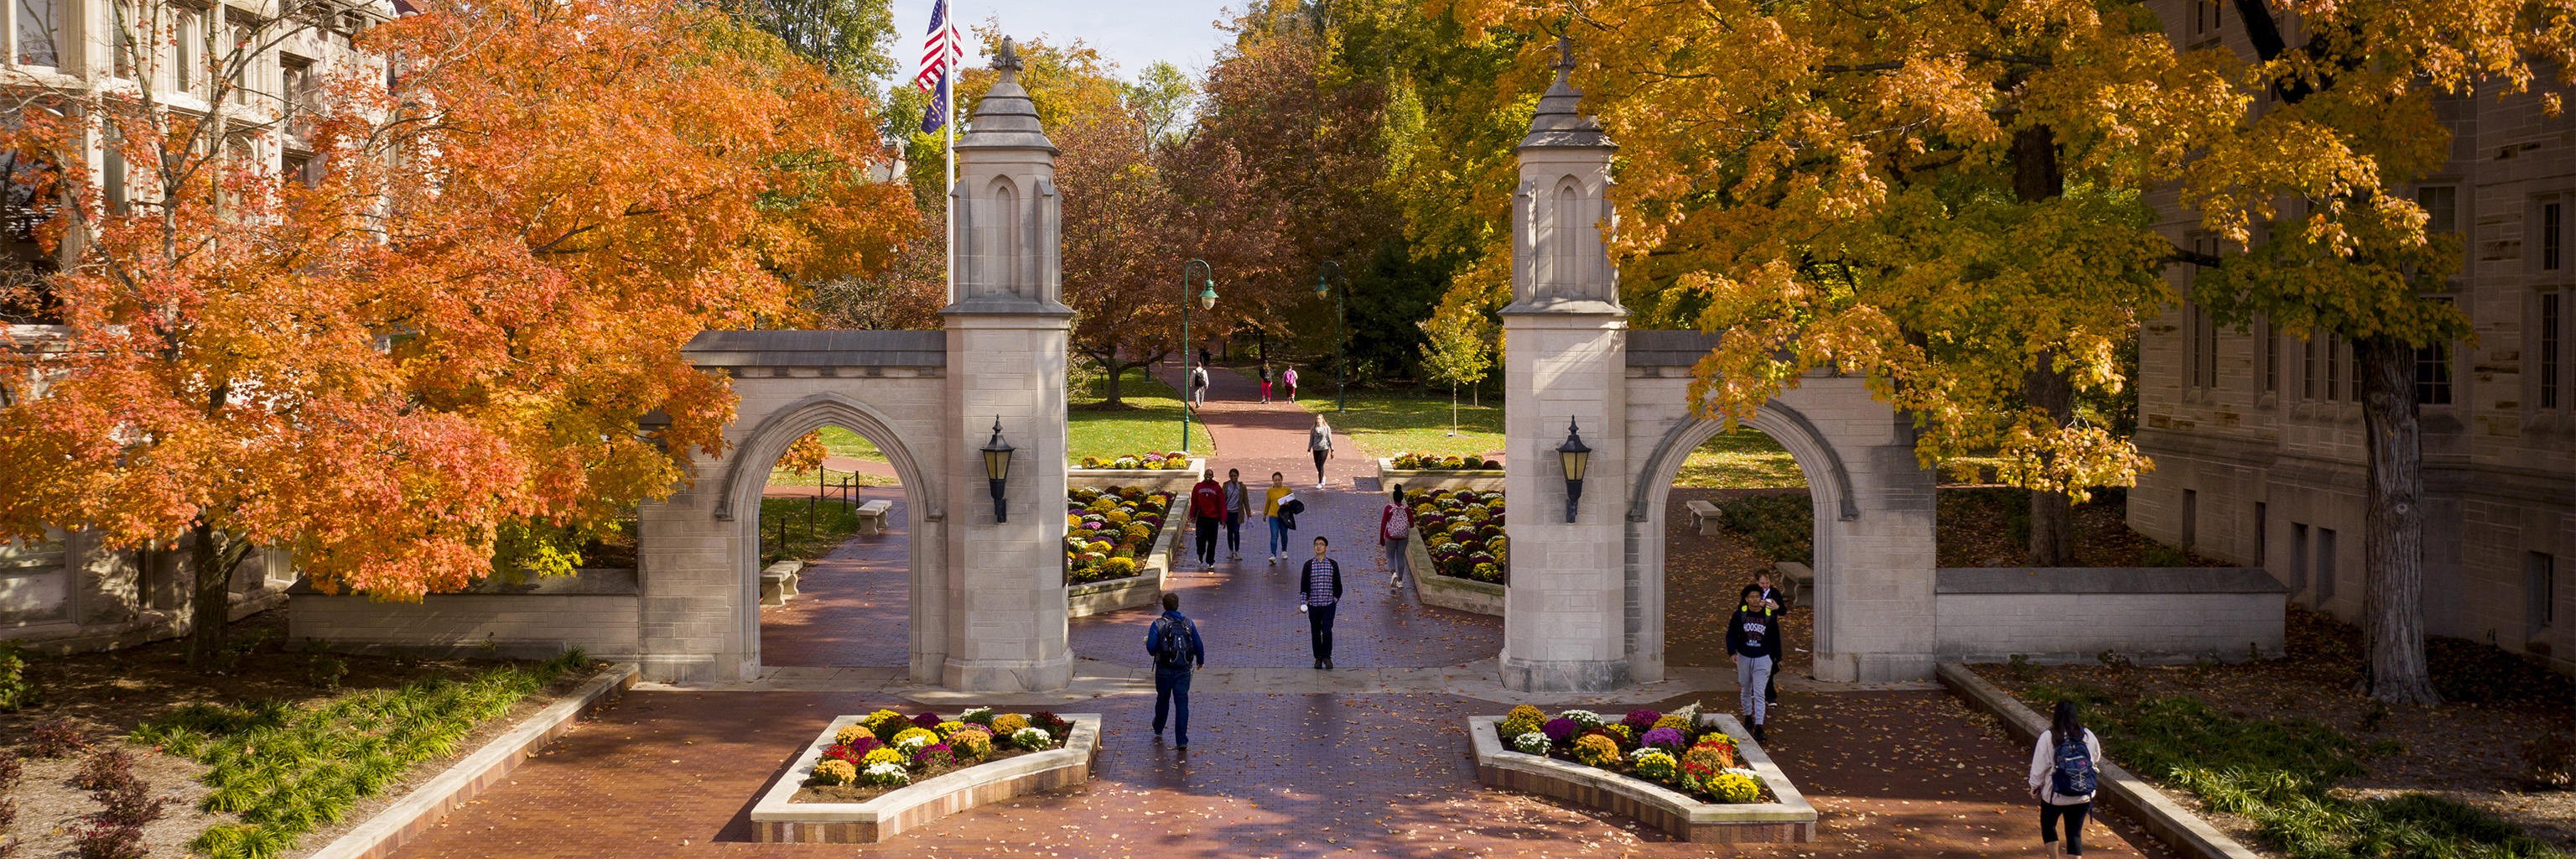 Students walking through the Sample Gates on a fall day at the Indiana University Campus.